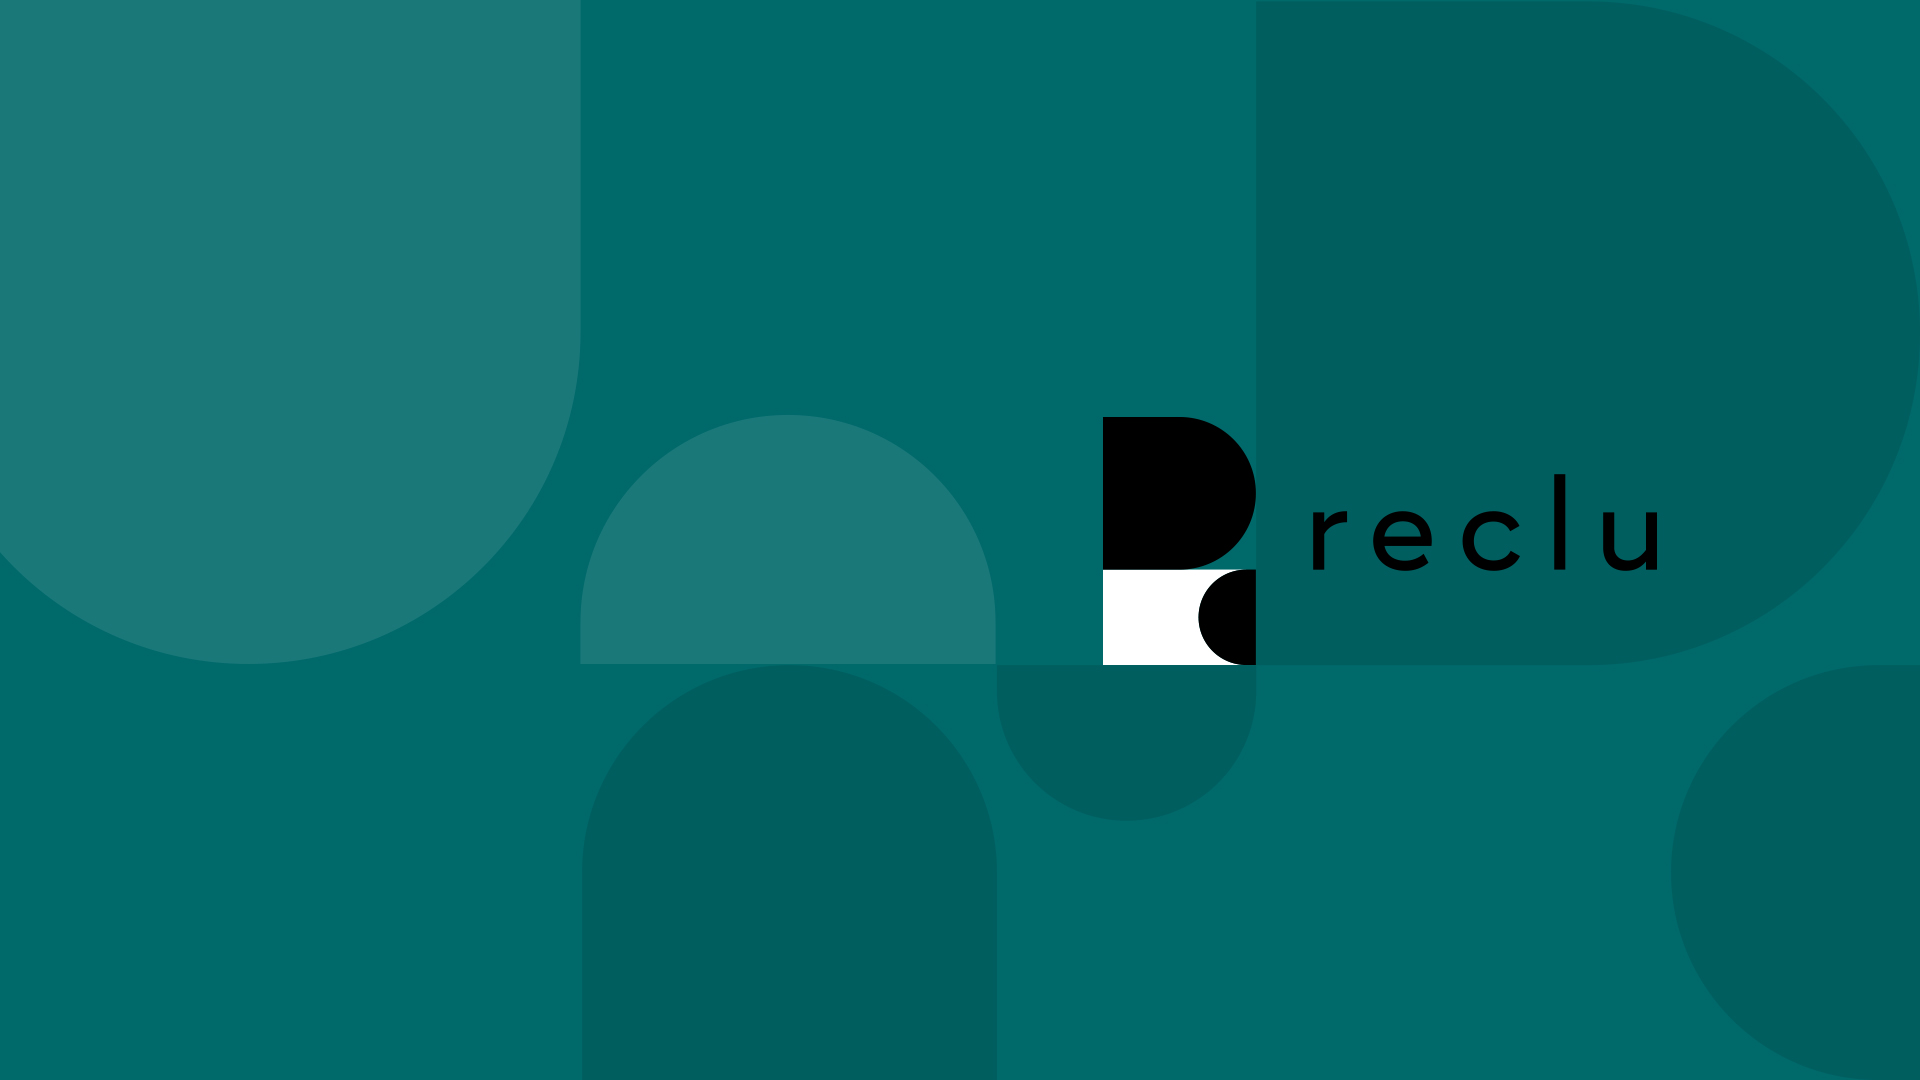 Reclu-Visual-Identity-by-Emtisquare-1